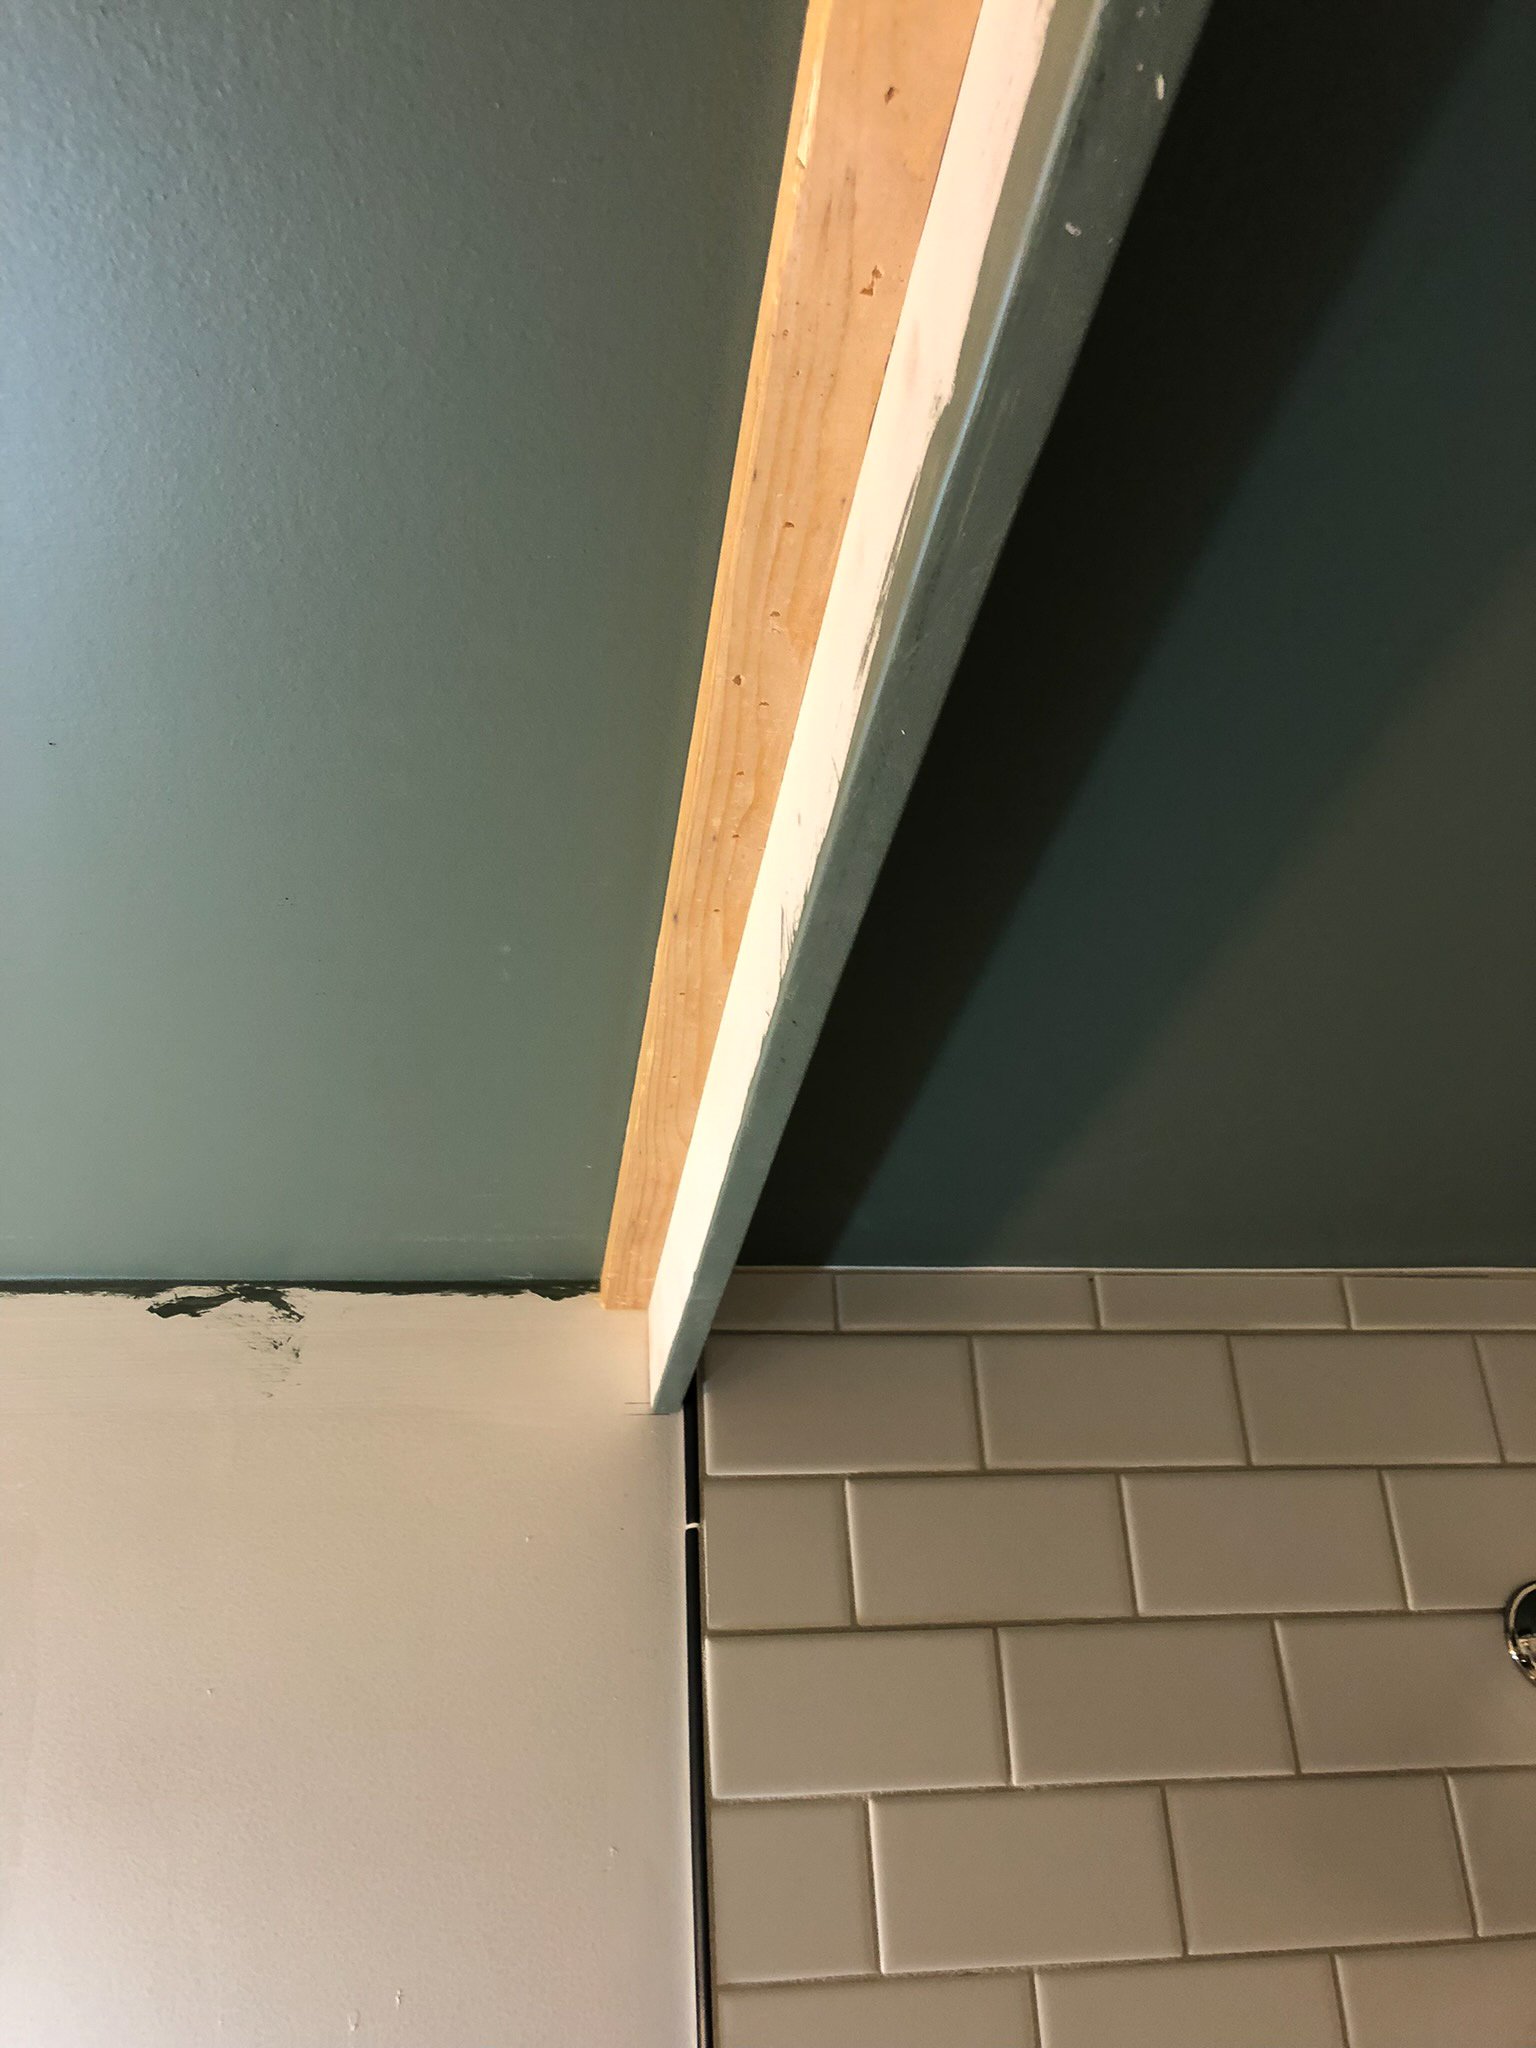 1x4" valence added in front of  shower, nailed to nailer in ceiling